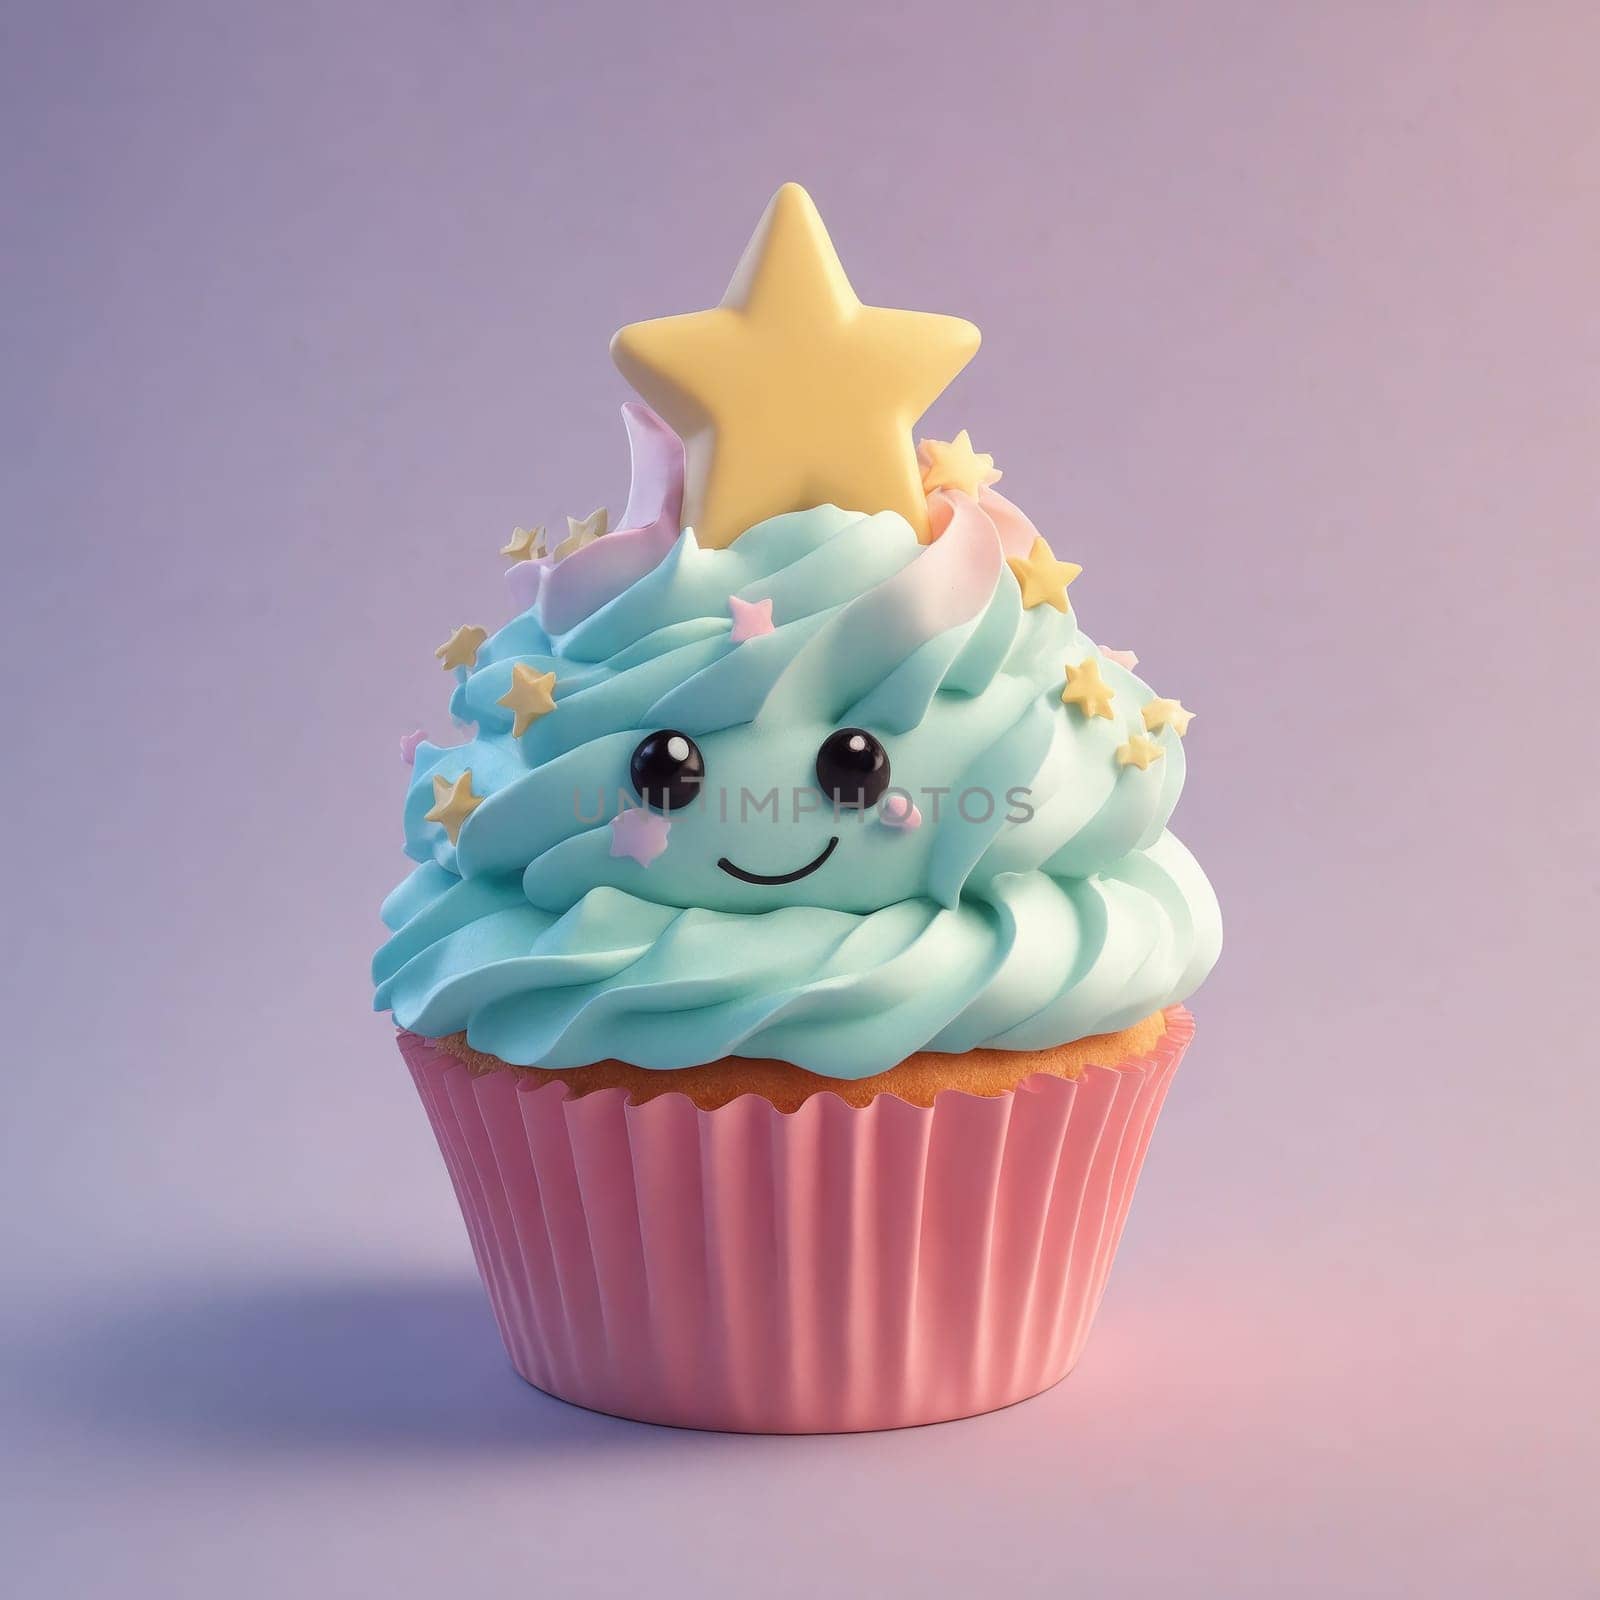 Cartoon Cupcake with Blue and Pink Icing and a Heart Topper by Andre1ns